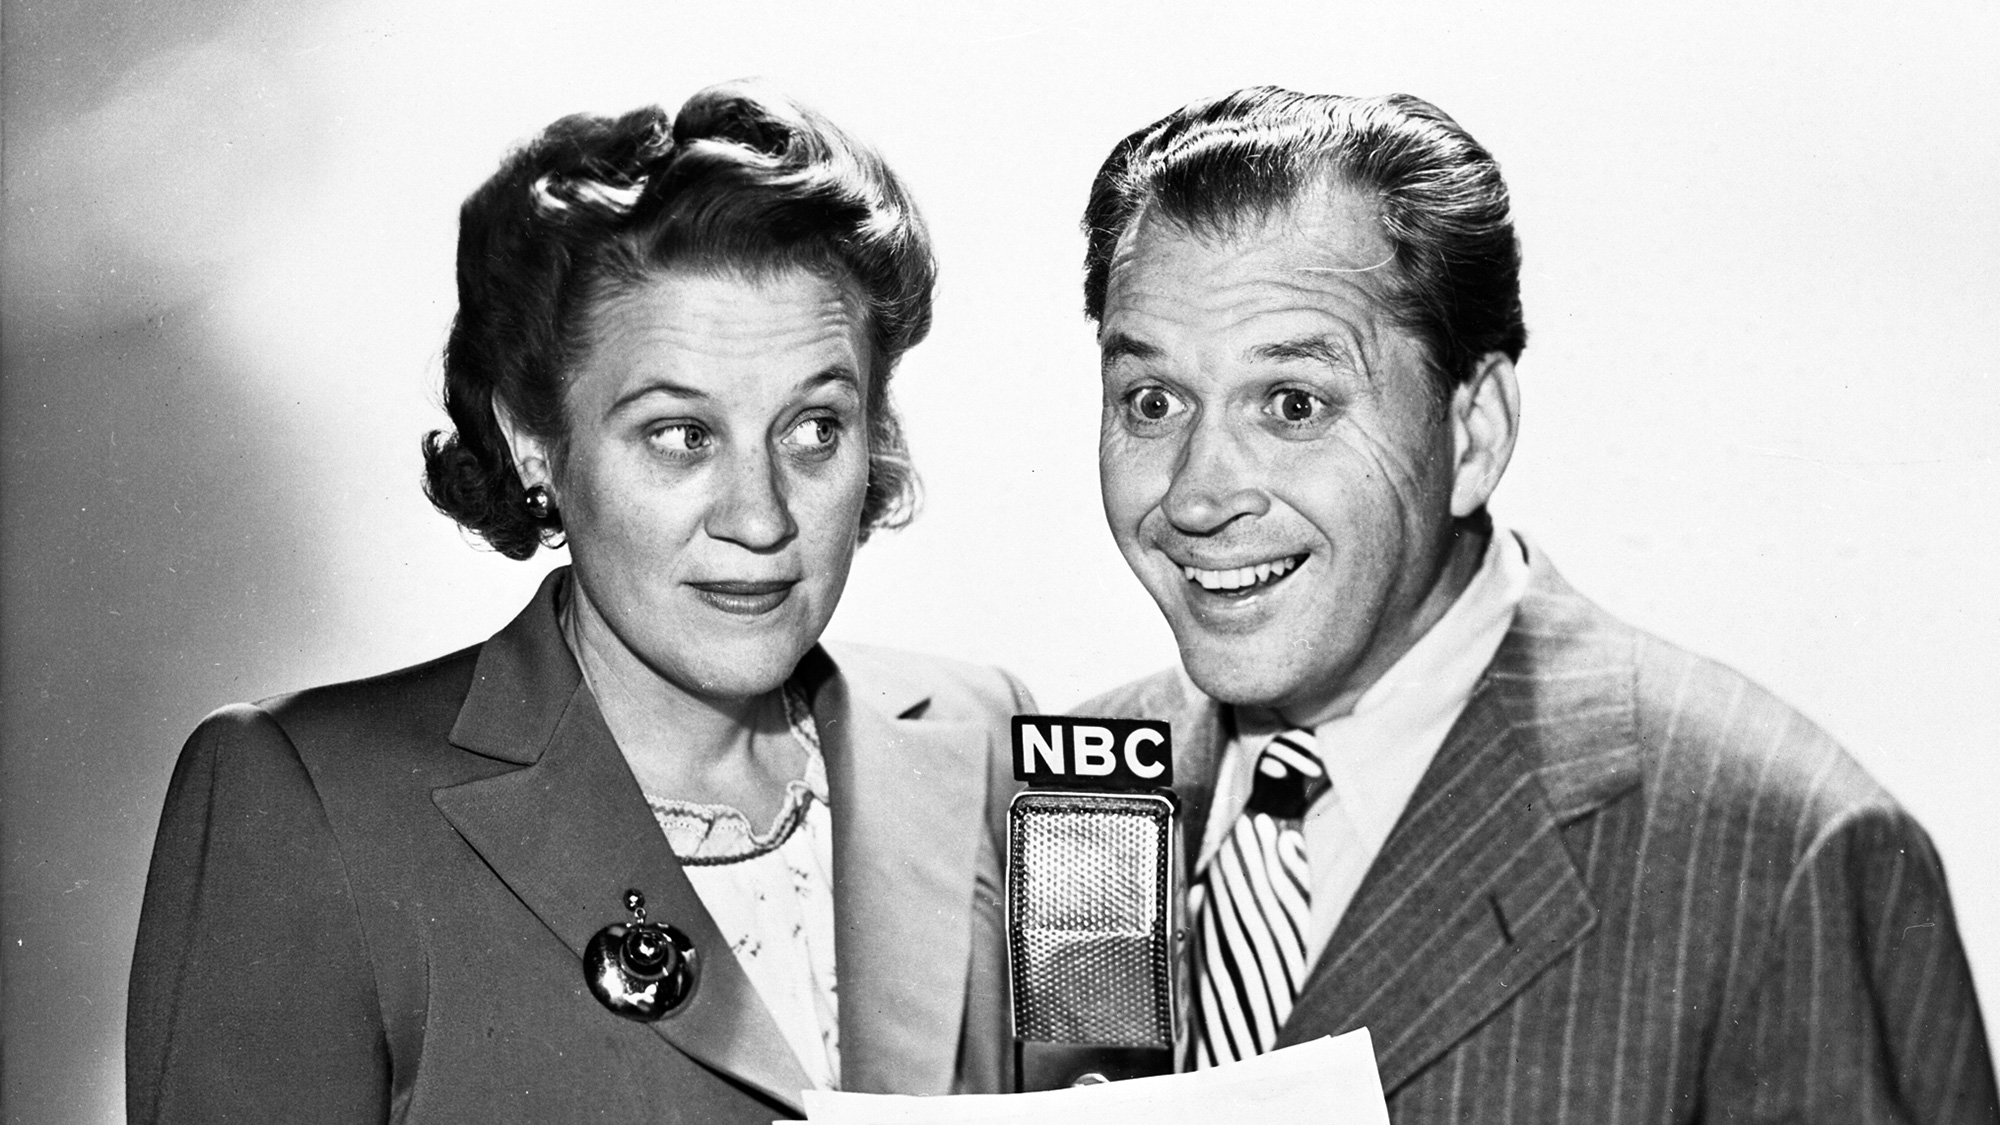 The Fibber McGee and Molly Show